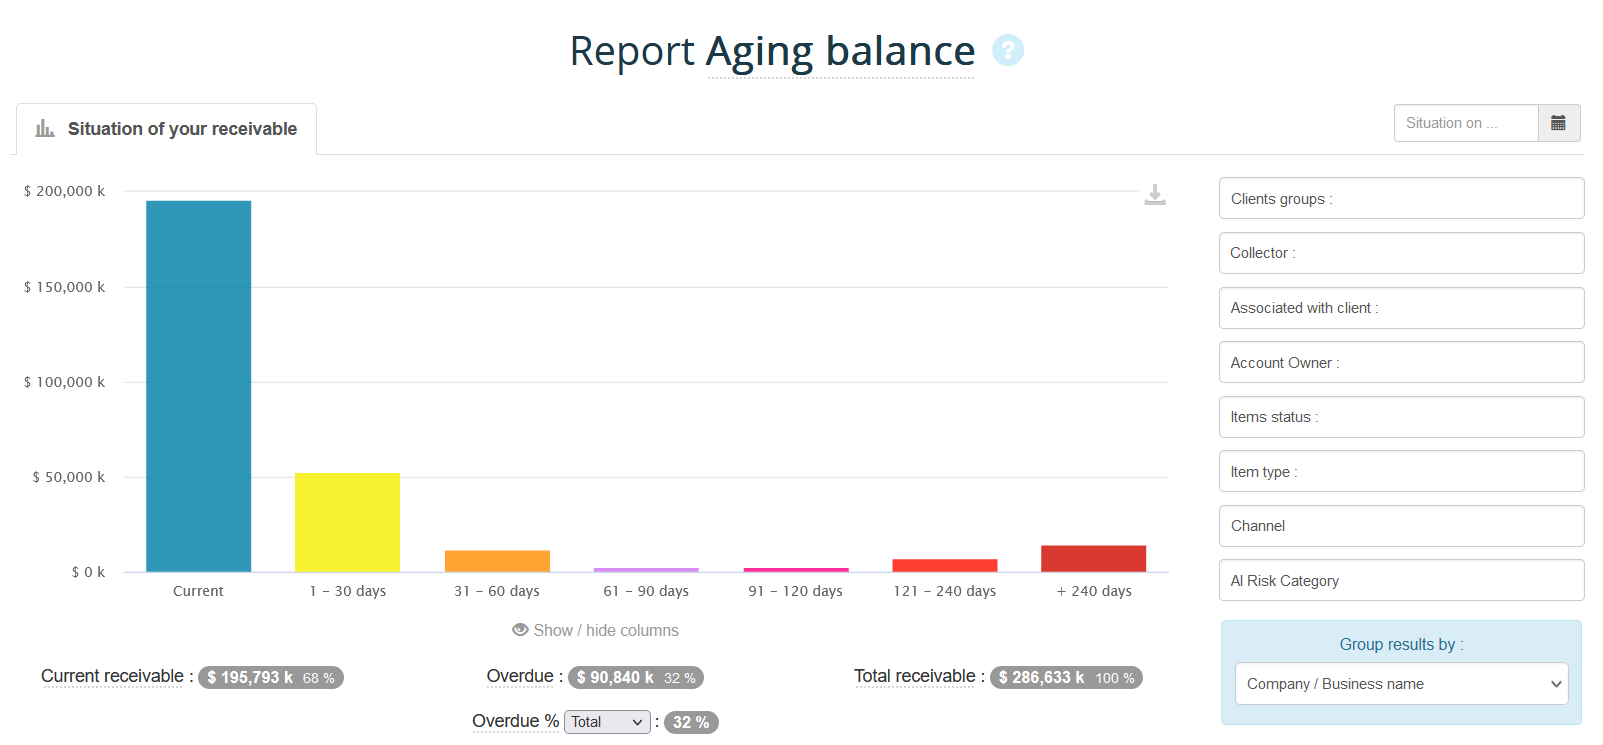 Aging balance report showing an account outstanding receivables